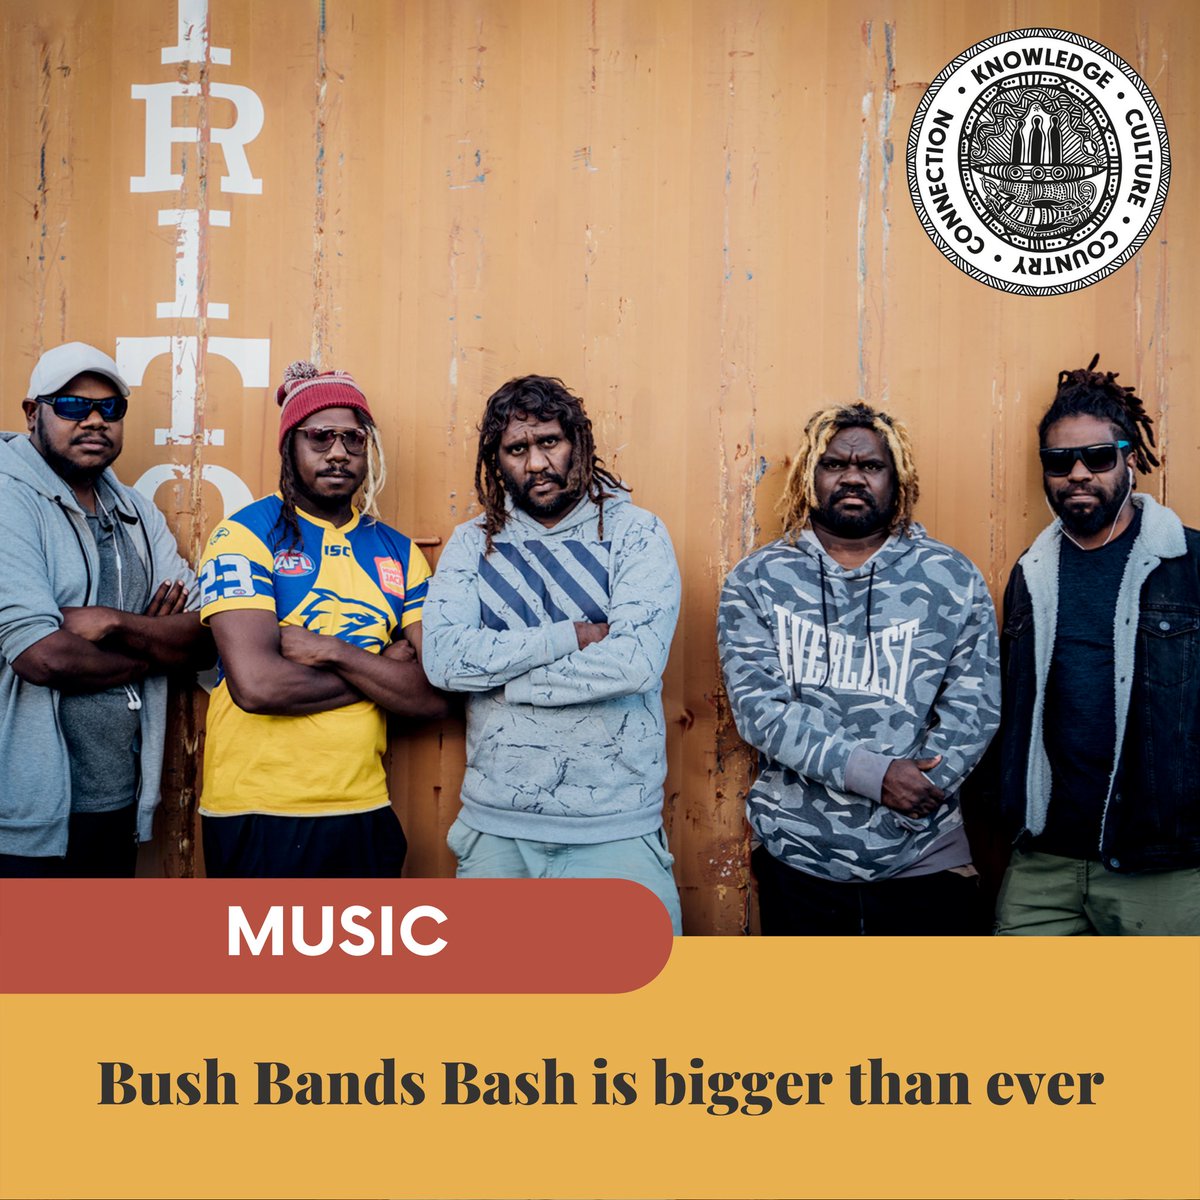 MusicNT’s Bush Bands Bash is considered one of Australia’s premier Indigenous music events. Since 2003, the annual concert attracts thousands to gather in central Australia and witness musicians from some of the country’s most remote communities hit the big stage.